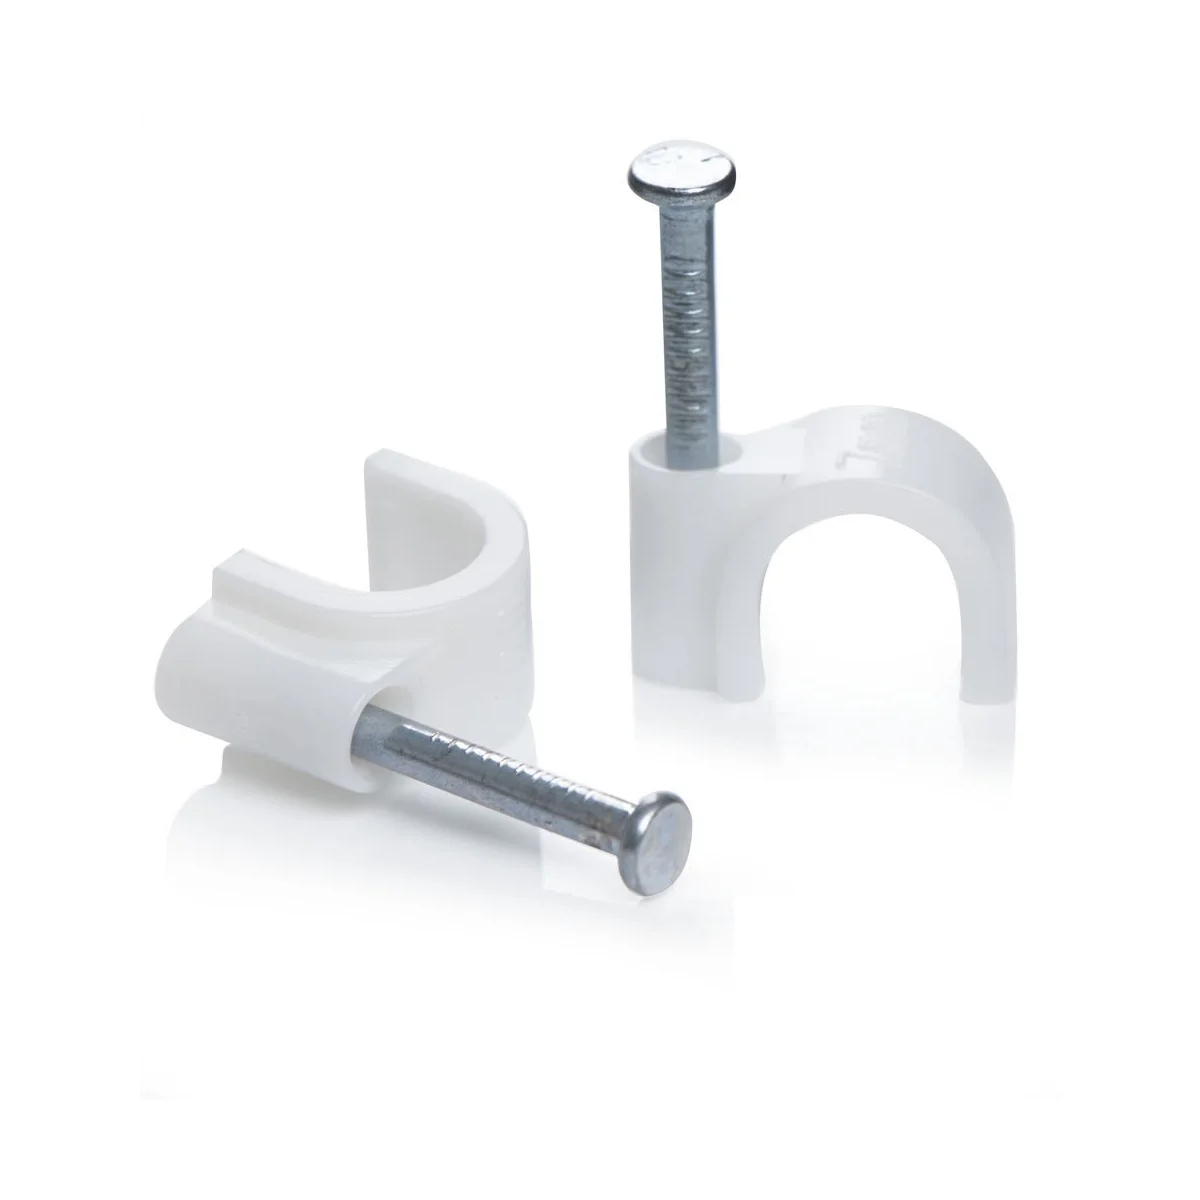 dn10 3/8inch nail clamps hammer-in pin| Alibaba.com